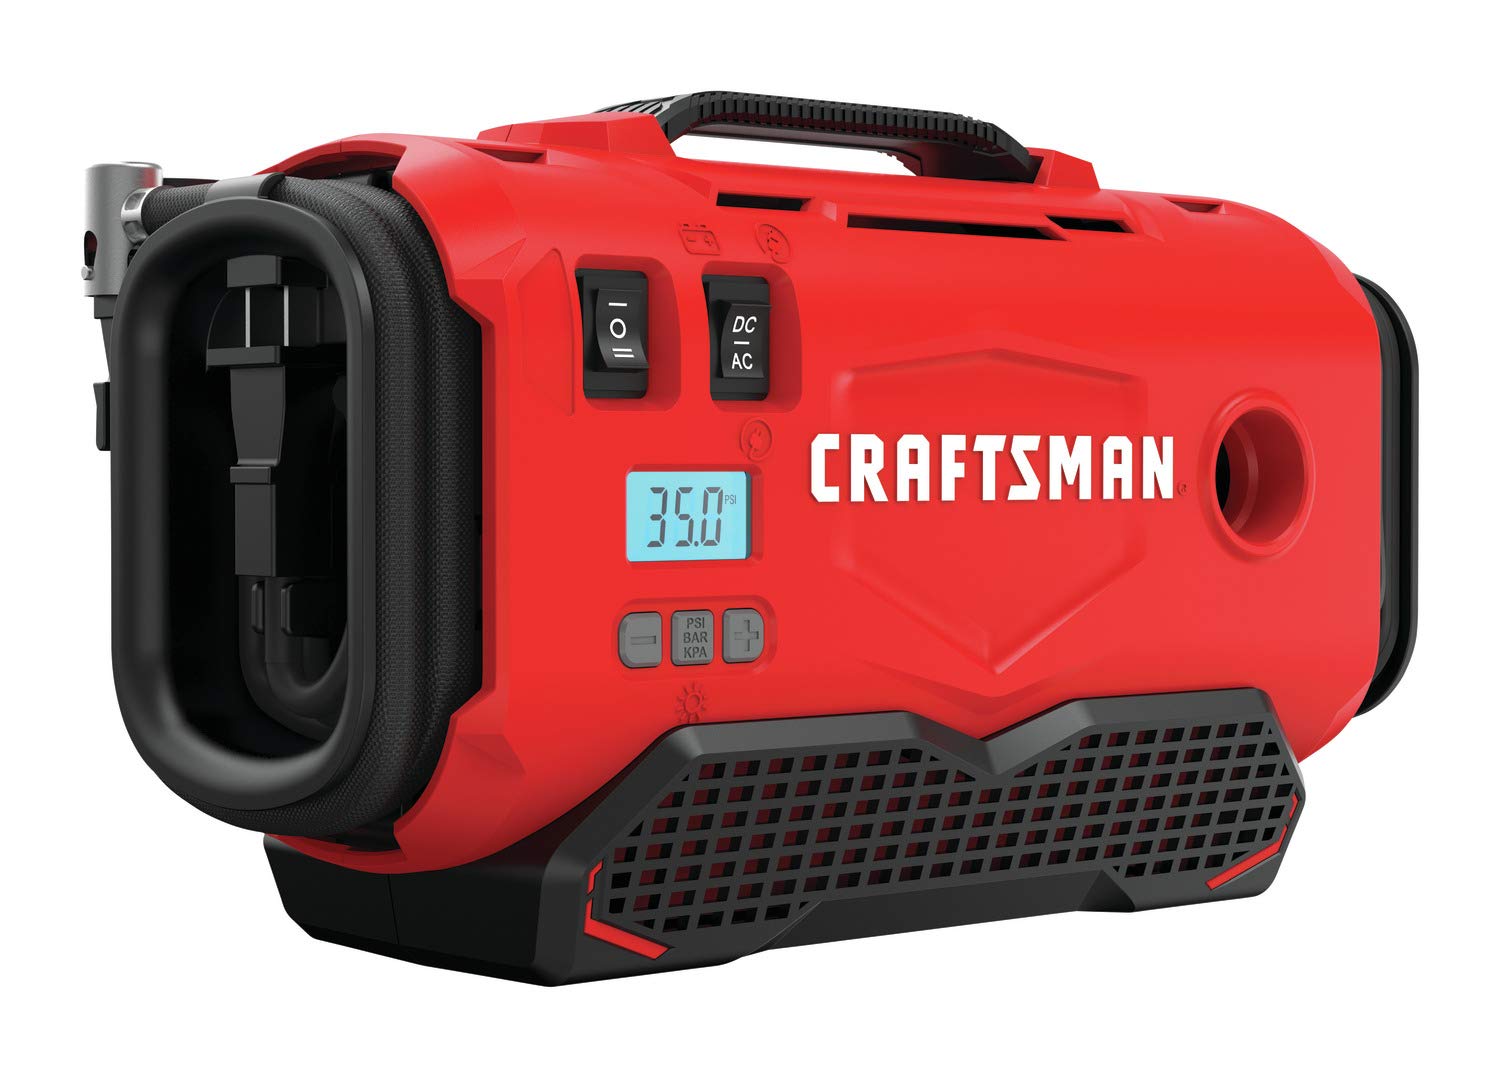 Craftsman V20 Tire Inflator, Compact and Portable, Auto...